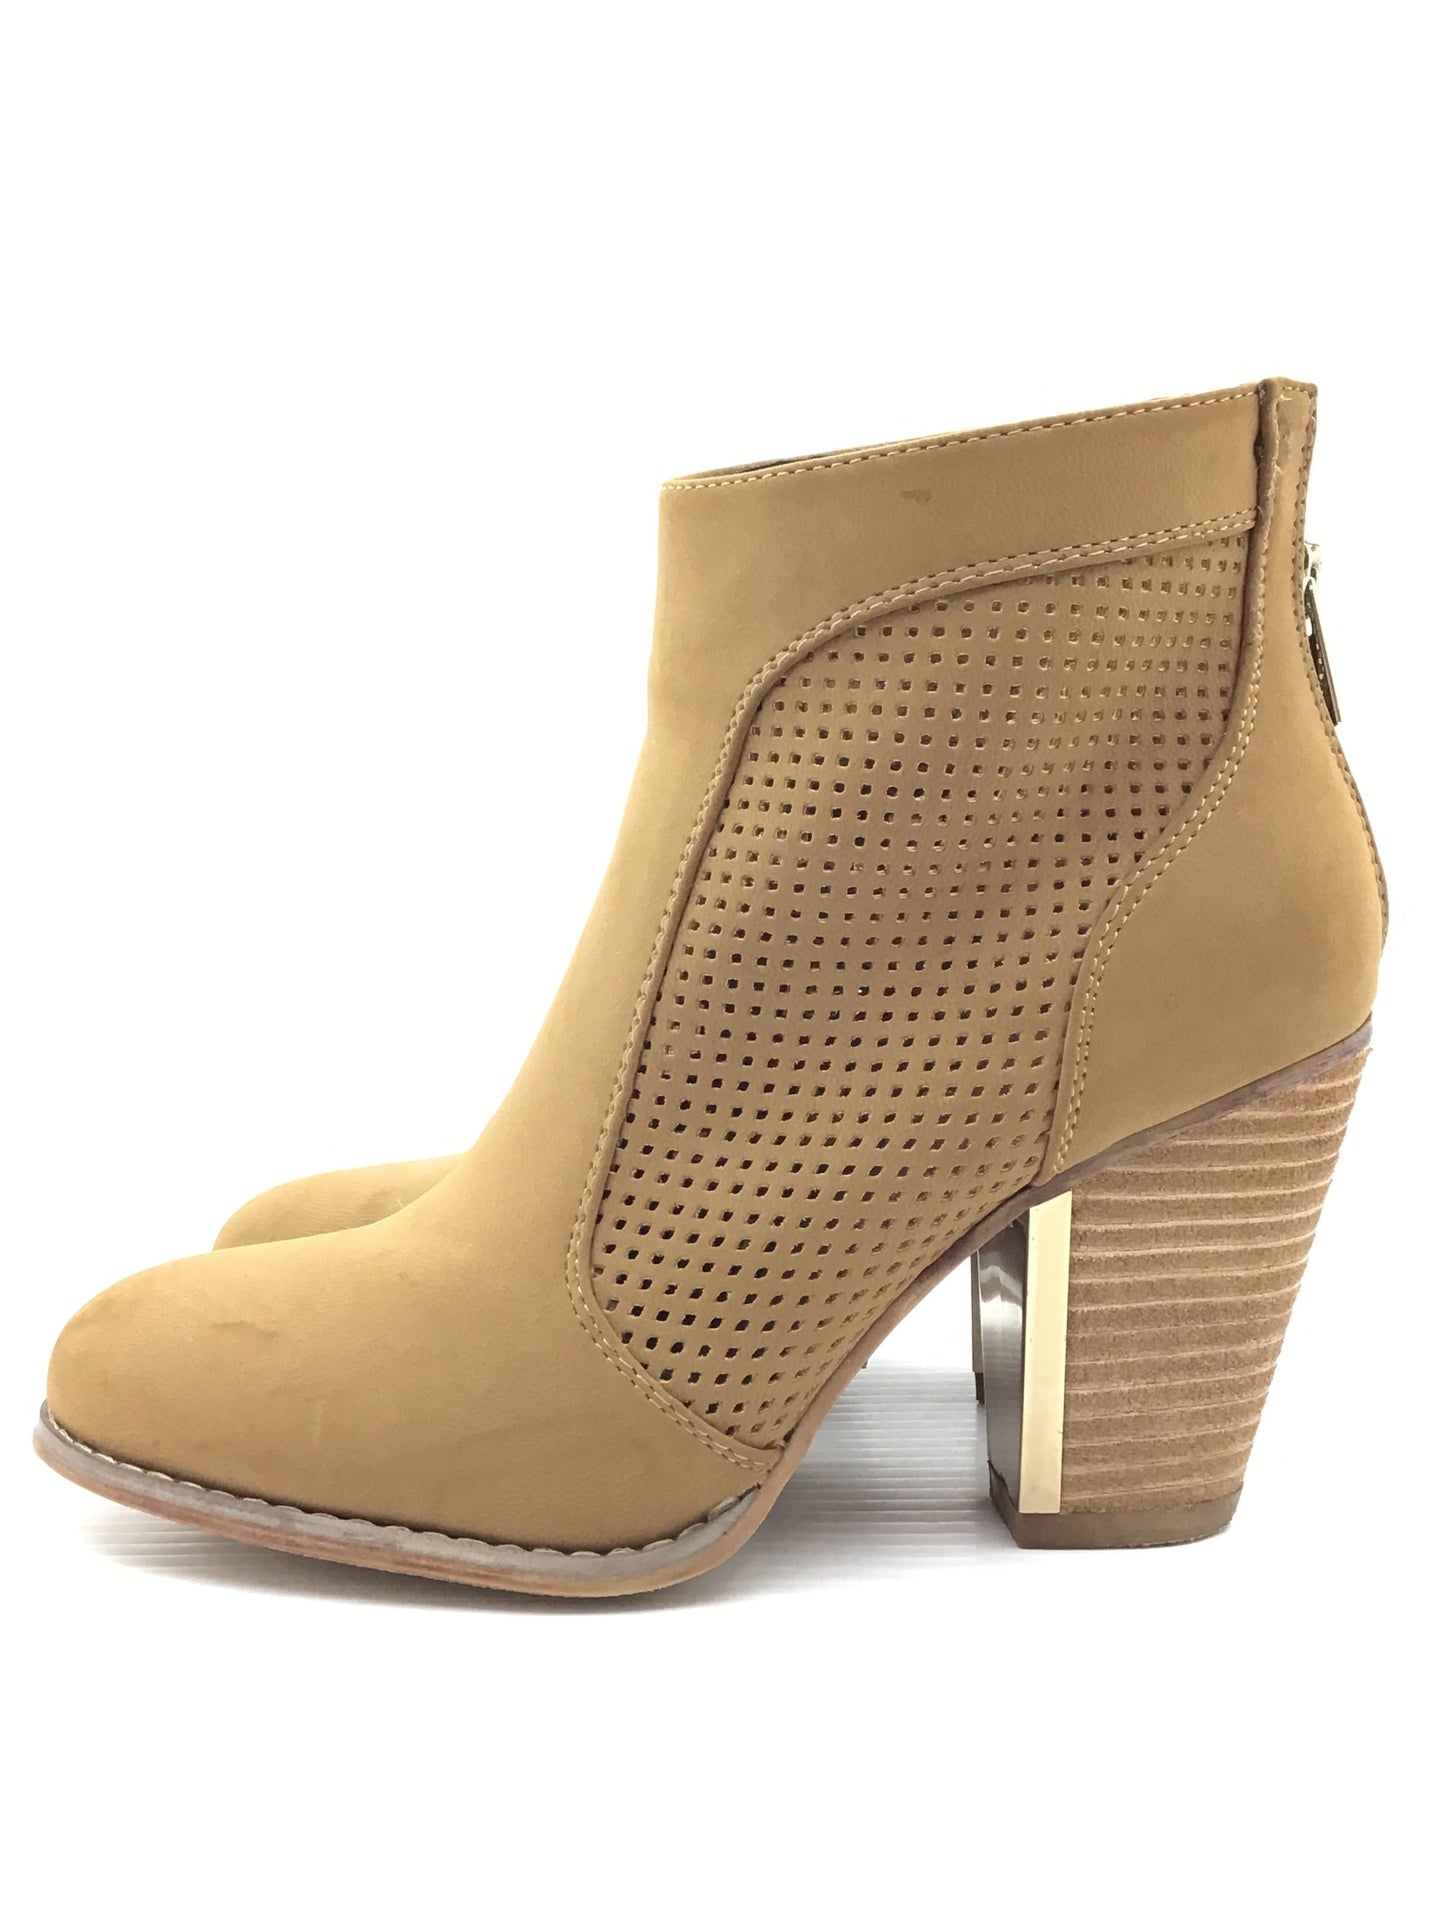 Boots Ankle Heels By Call It Spring  Size: 6.5